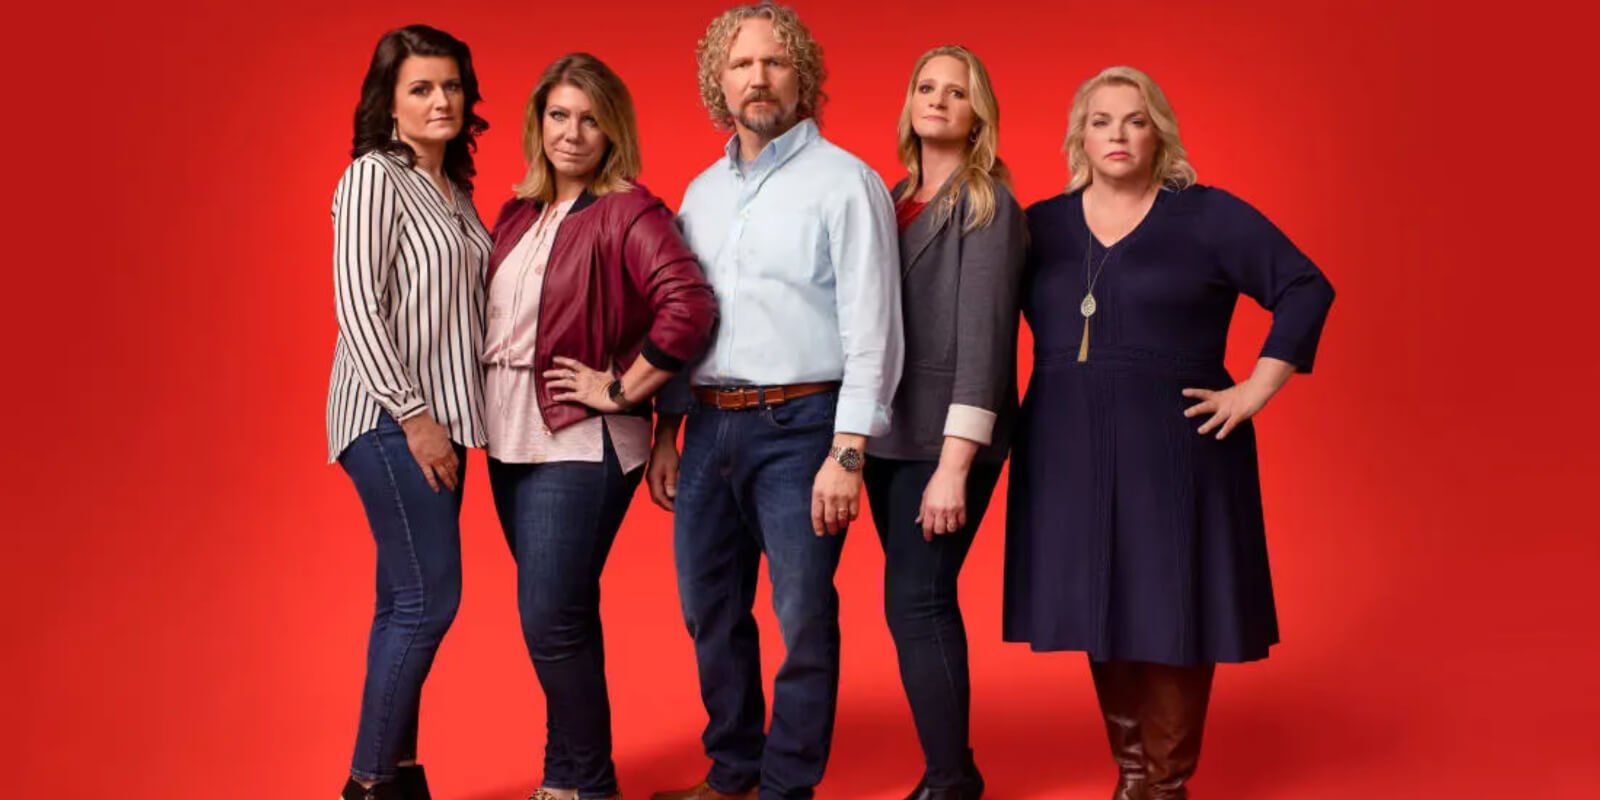 A photograph taken for season 14 of TLC's 'Sister Wives' featuring Robyn, Meri, Kody, Janelle, and Christine Brown.